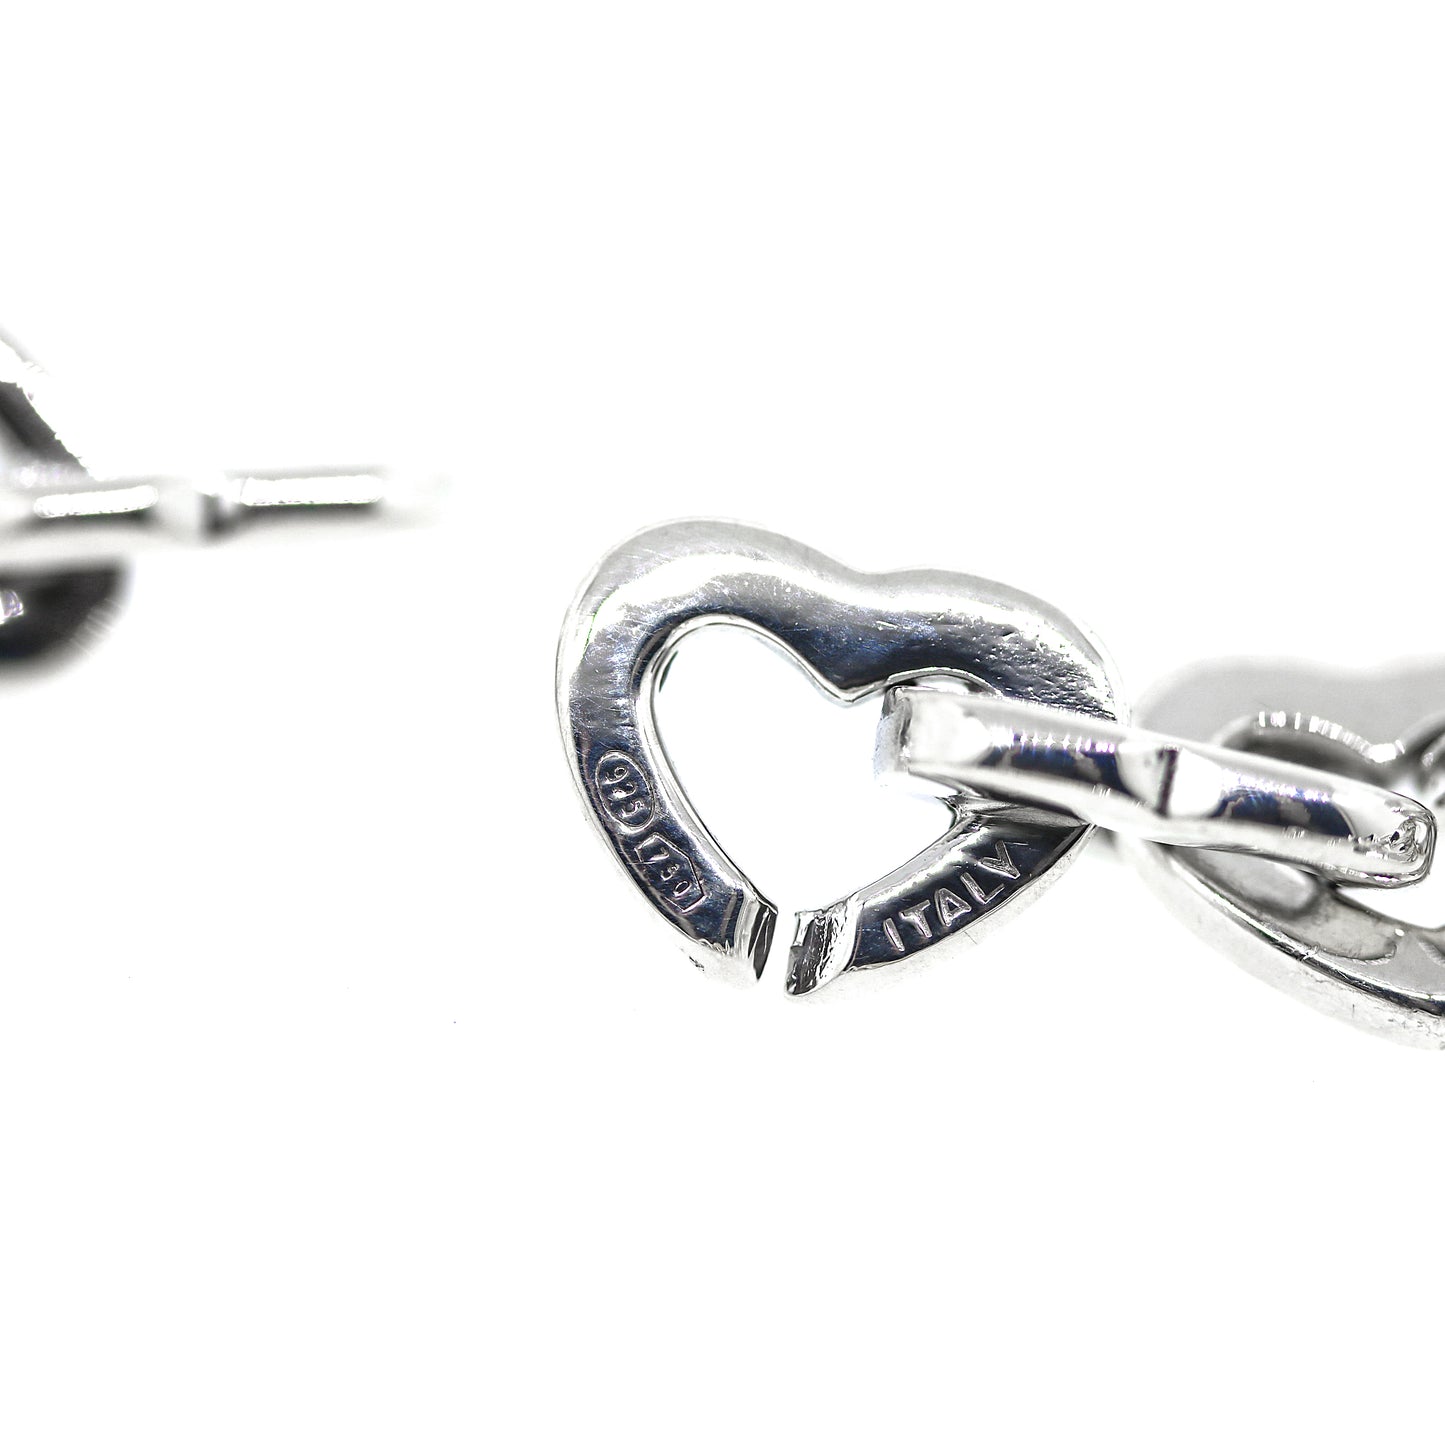 Tiffany and Co. Silver and Gold Heart Link Bracelet